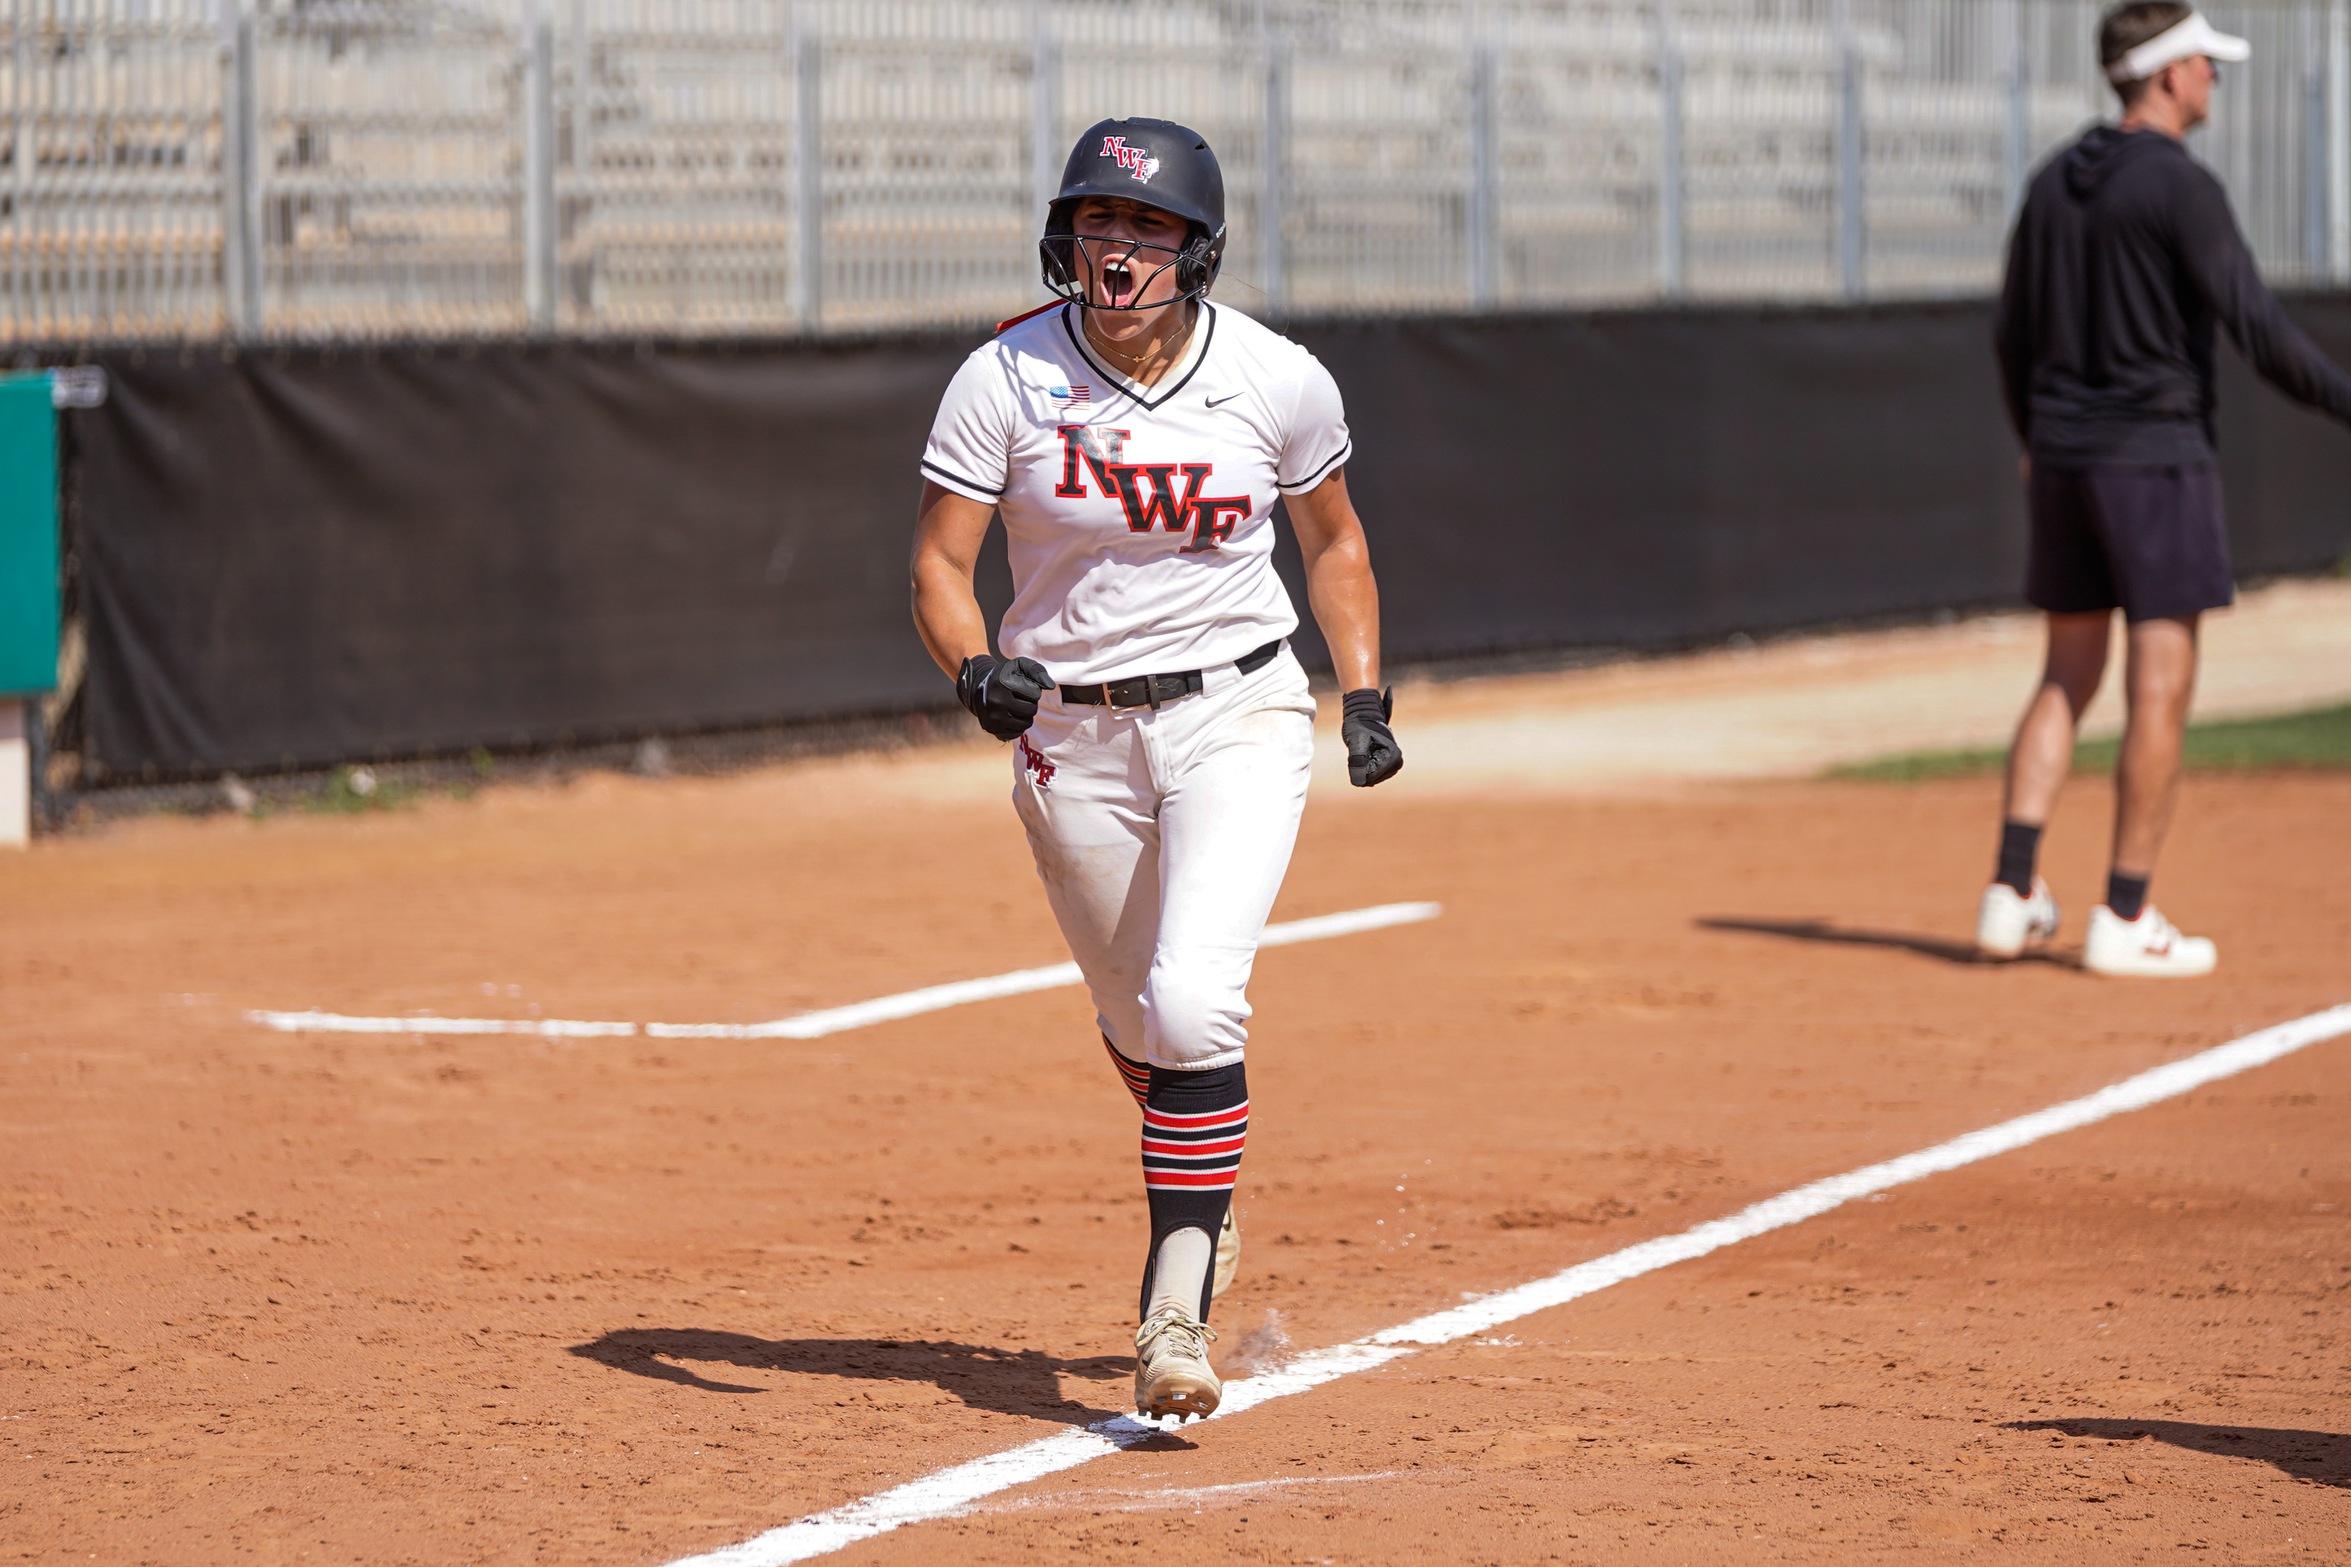 Heyl Earns Win No. 32 as NWF Survives Seminole State With 4-1 Victory